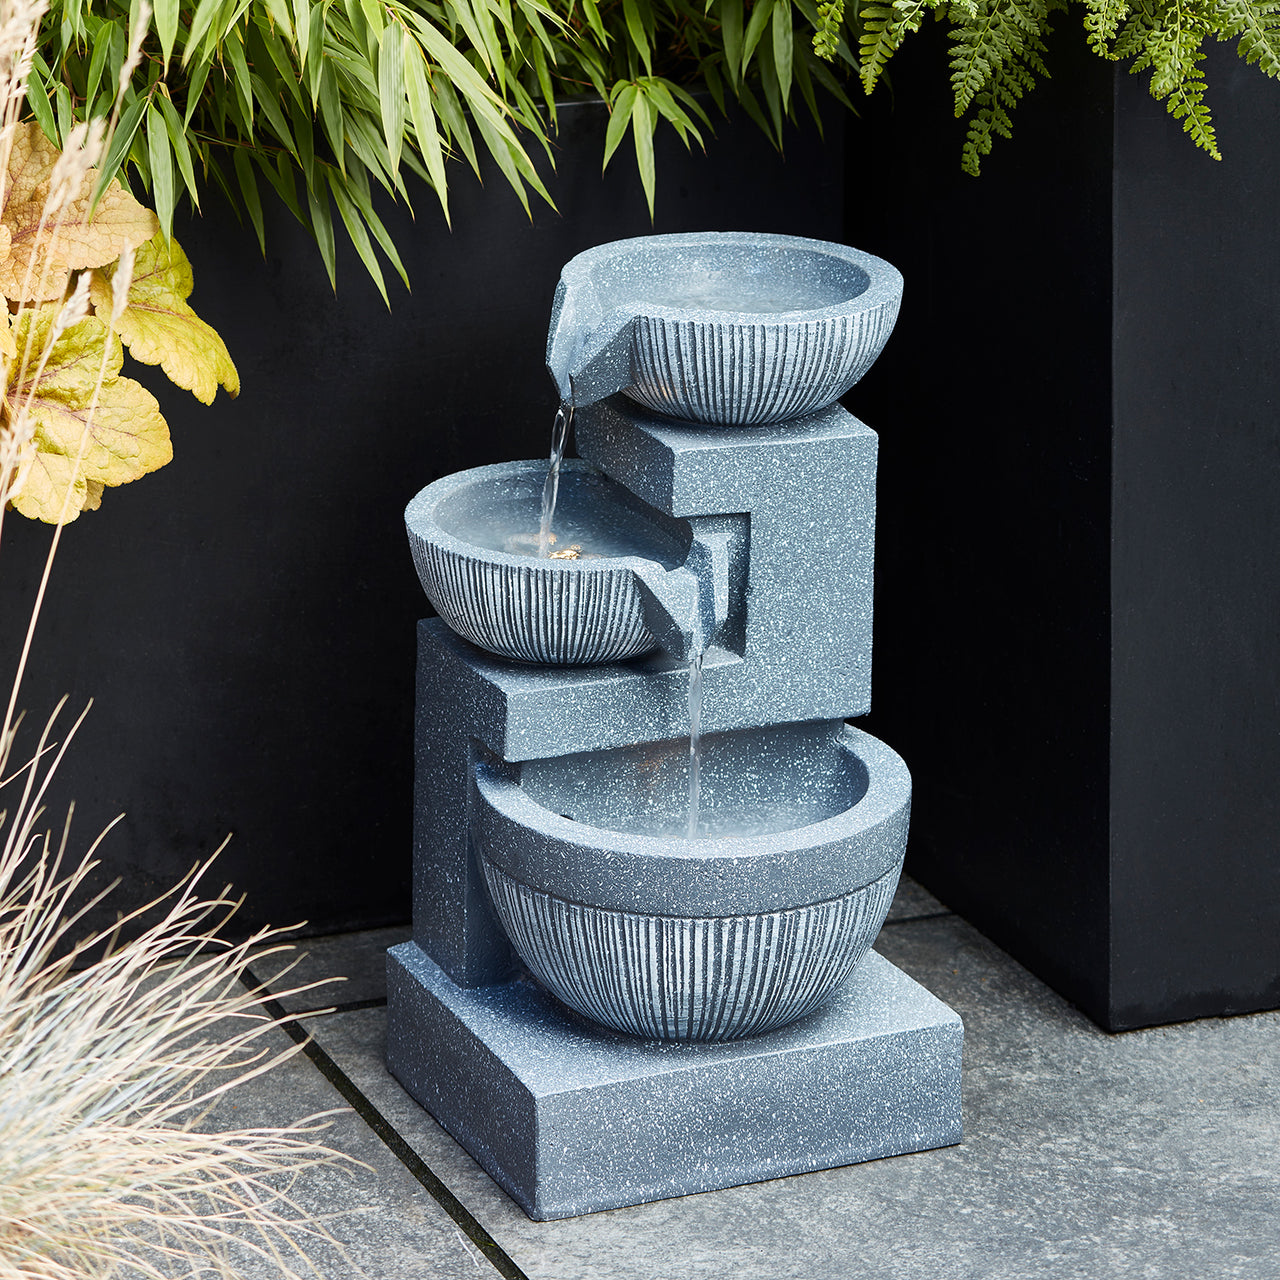 3 Bowl Water Feature